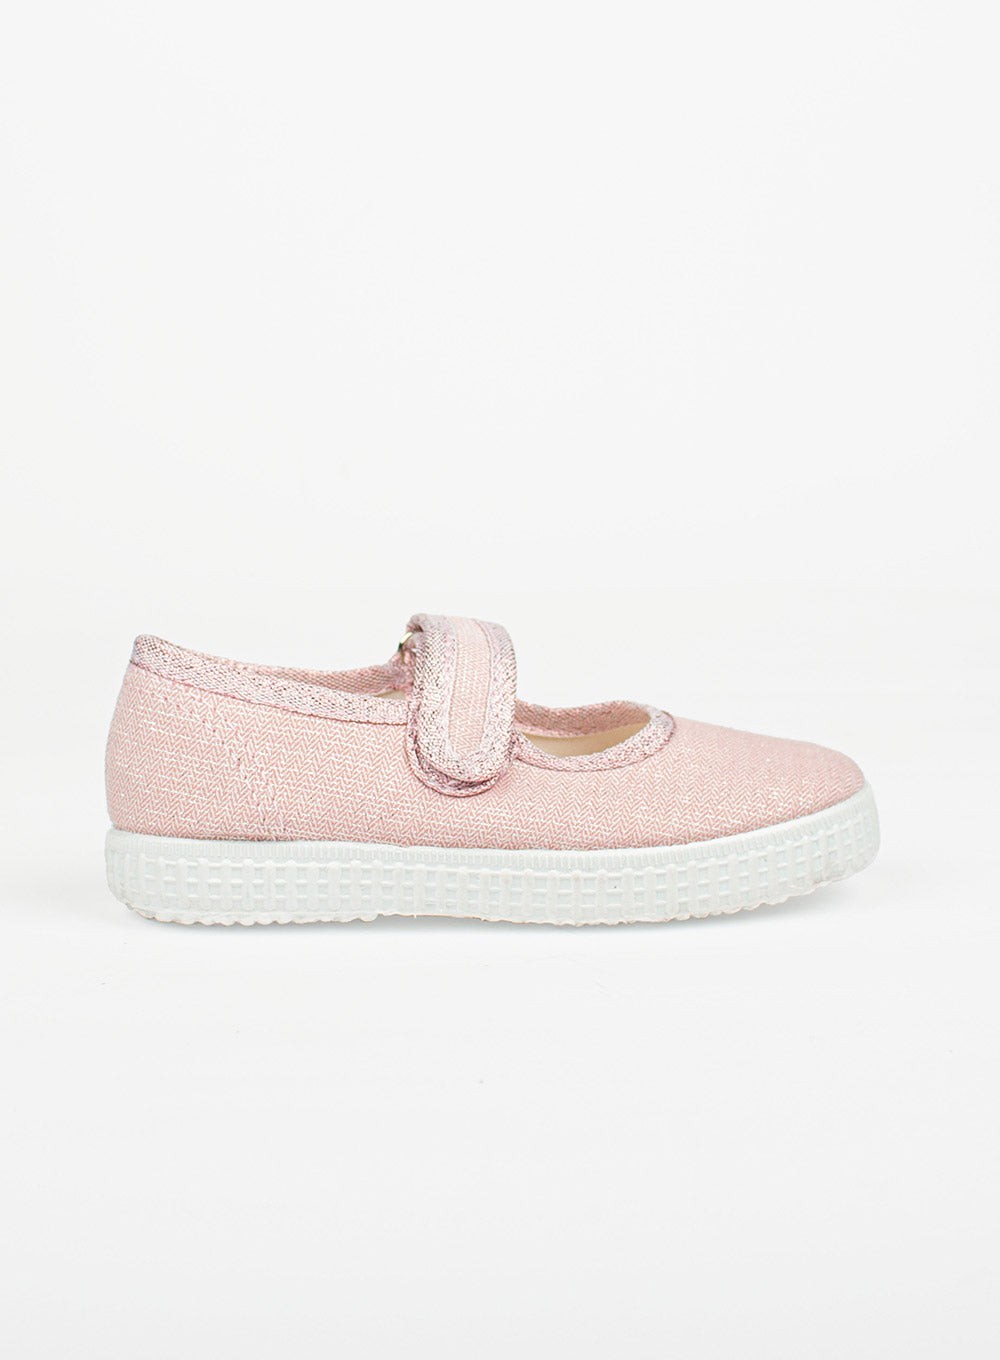 Hampton Canvas Martha Canvas Shoes in Pink Sparkle | Trotters ...